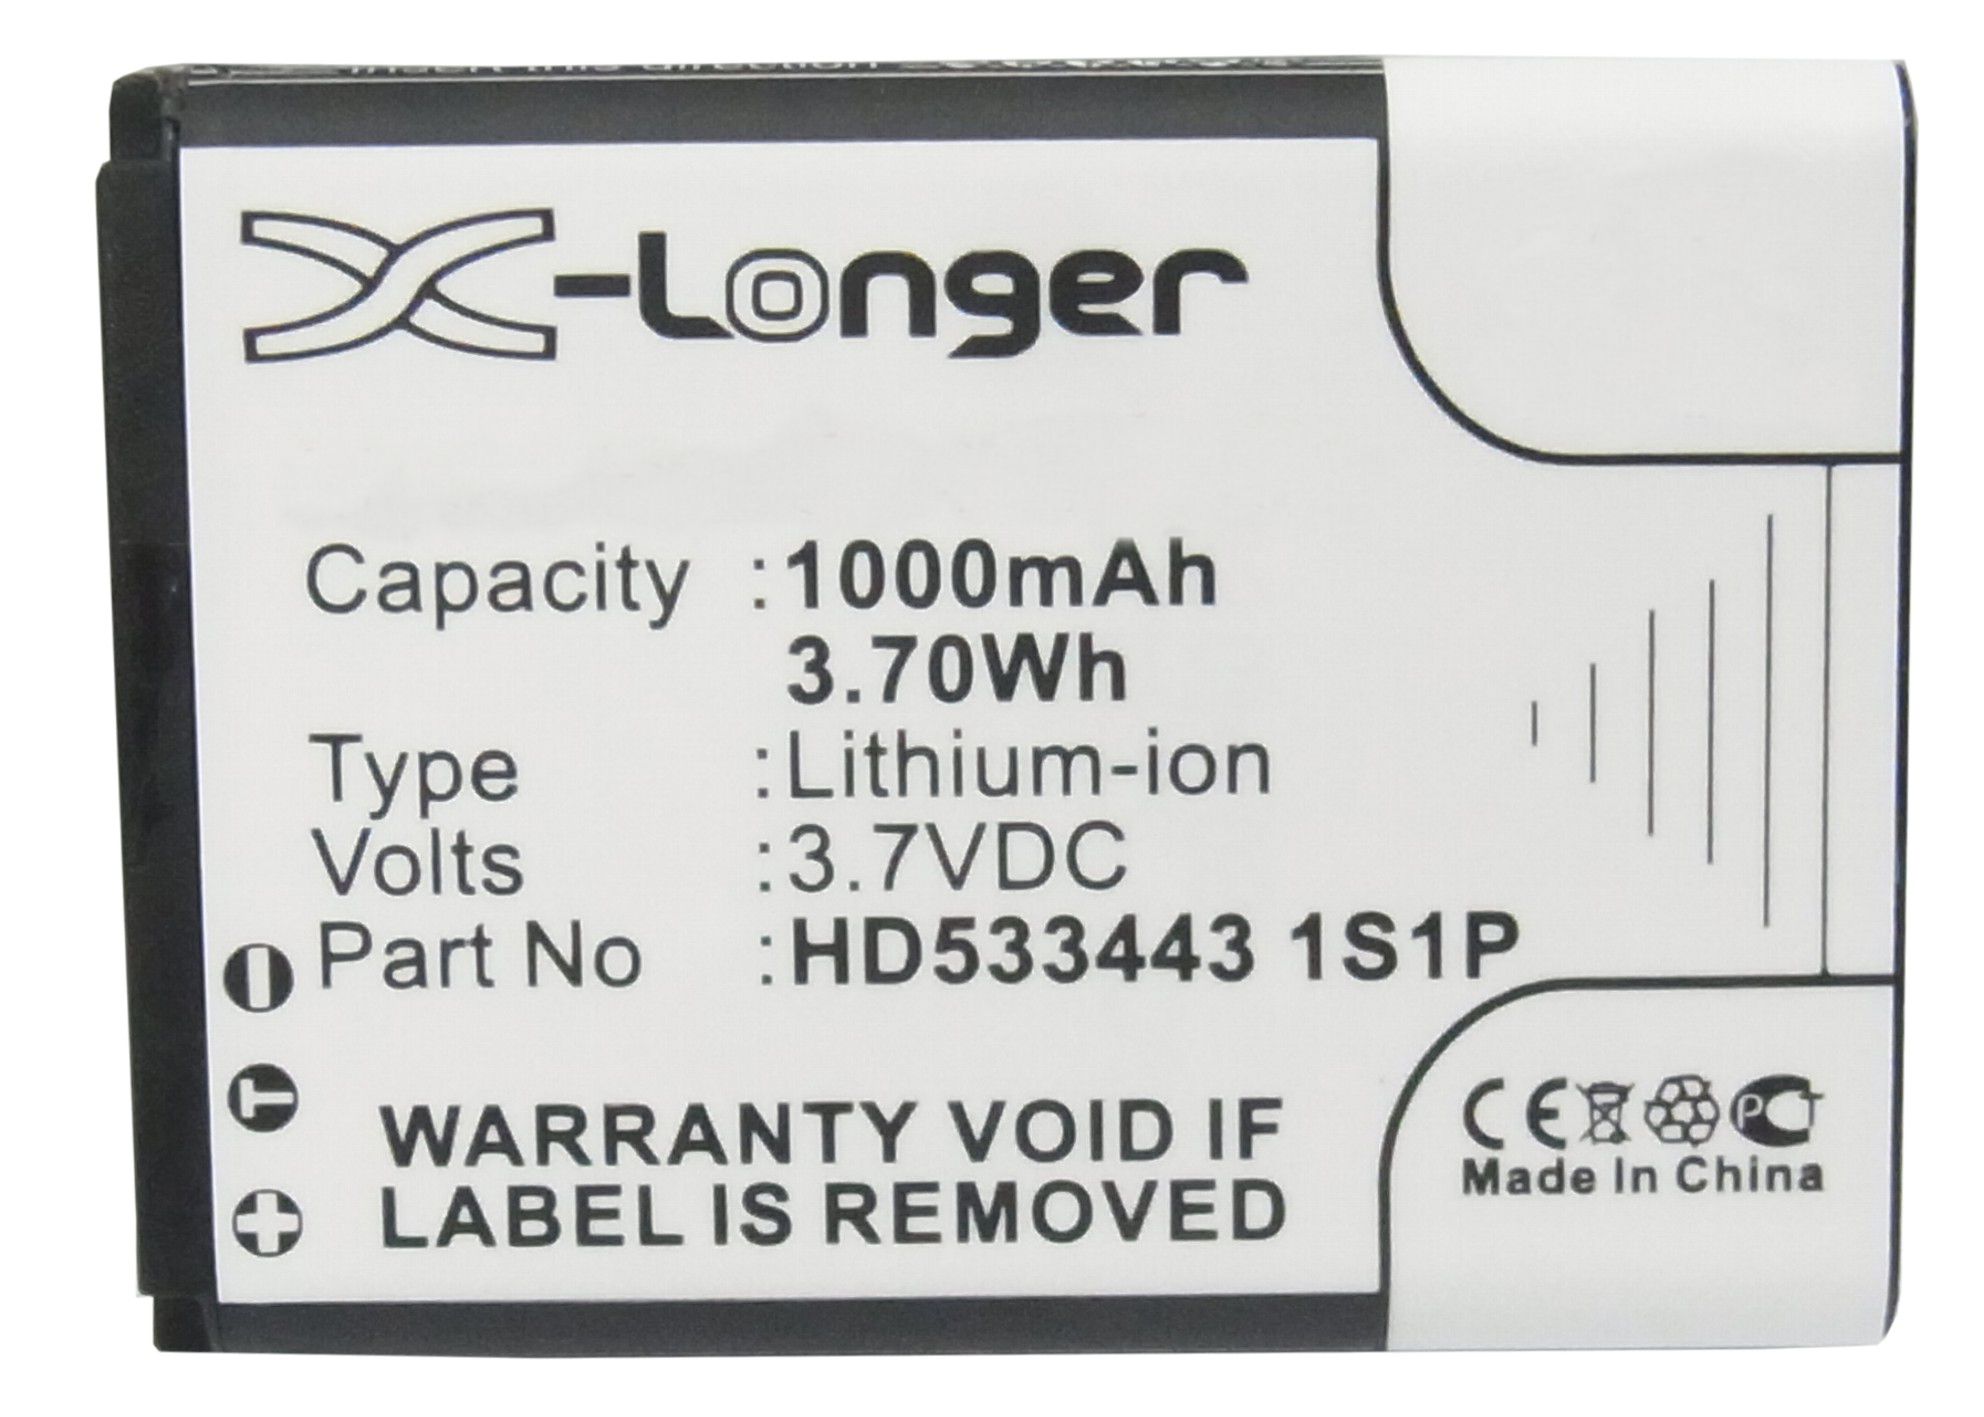 Synergy Digital Battery Compatible With Fiio HD5334431S1P Replacement Battery - (Li-Ion, 3.7V, 1000 mAh)